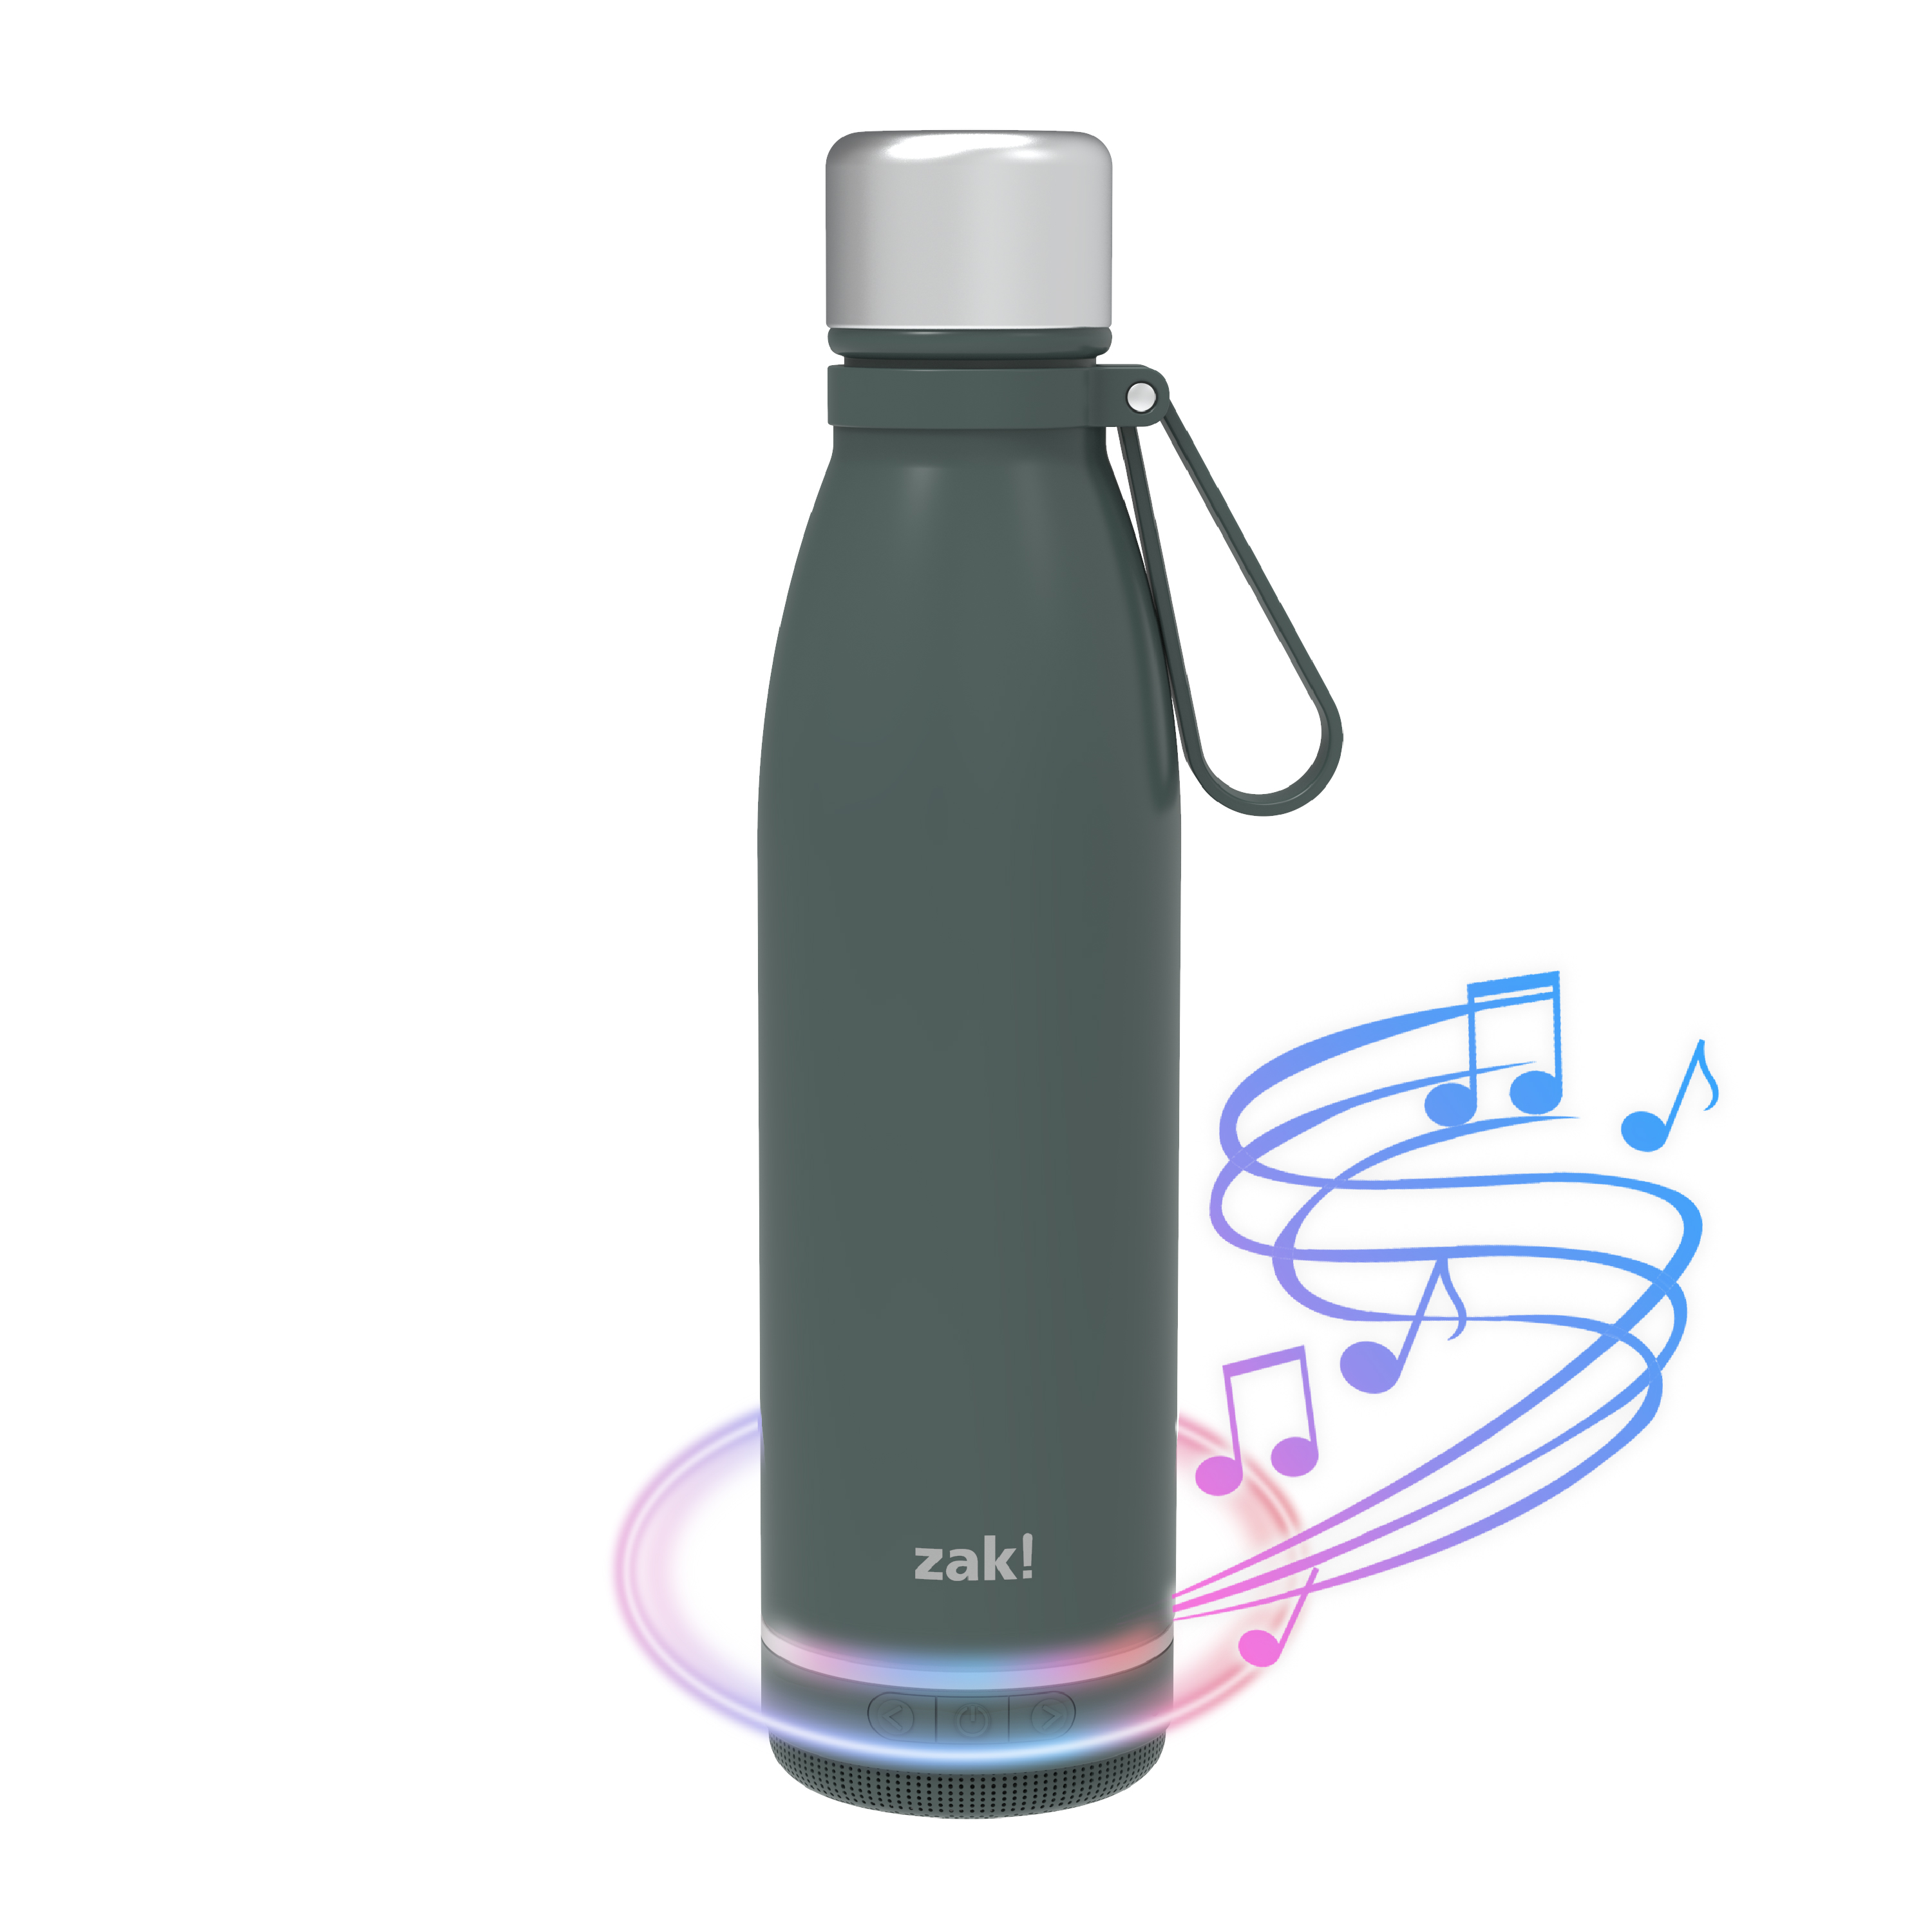 Zak Play 17.5 ounce Stainless Steel Tumbler with Bluetooth Speaker, Gray slideshow image 12